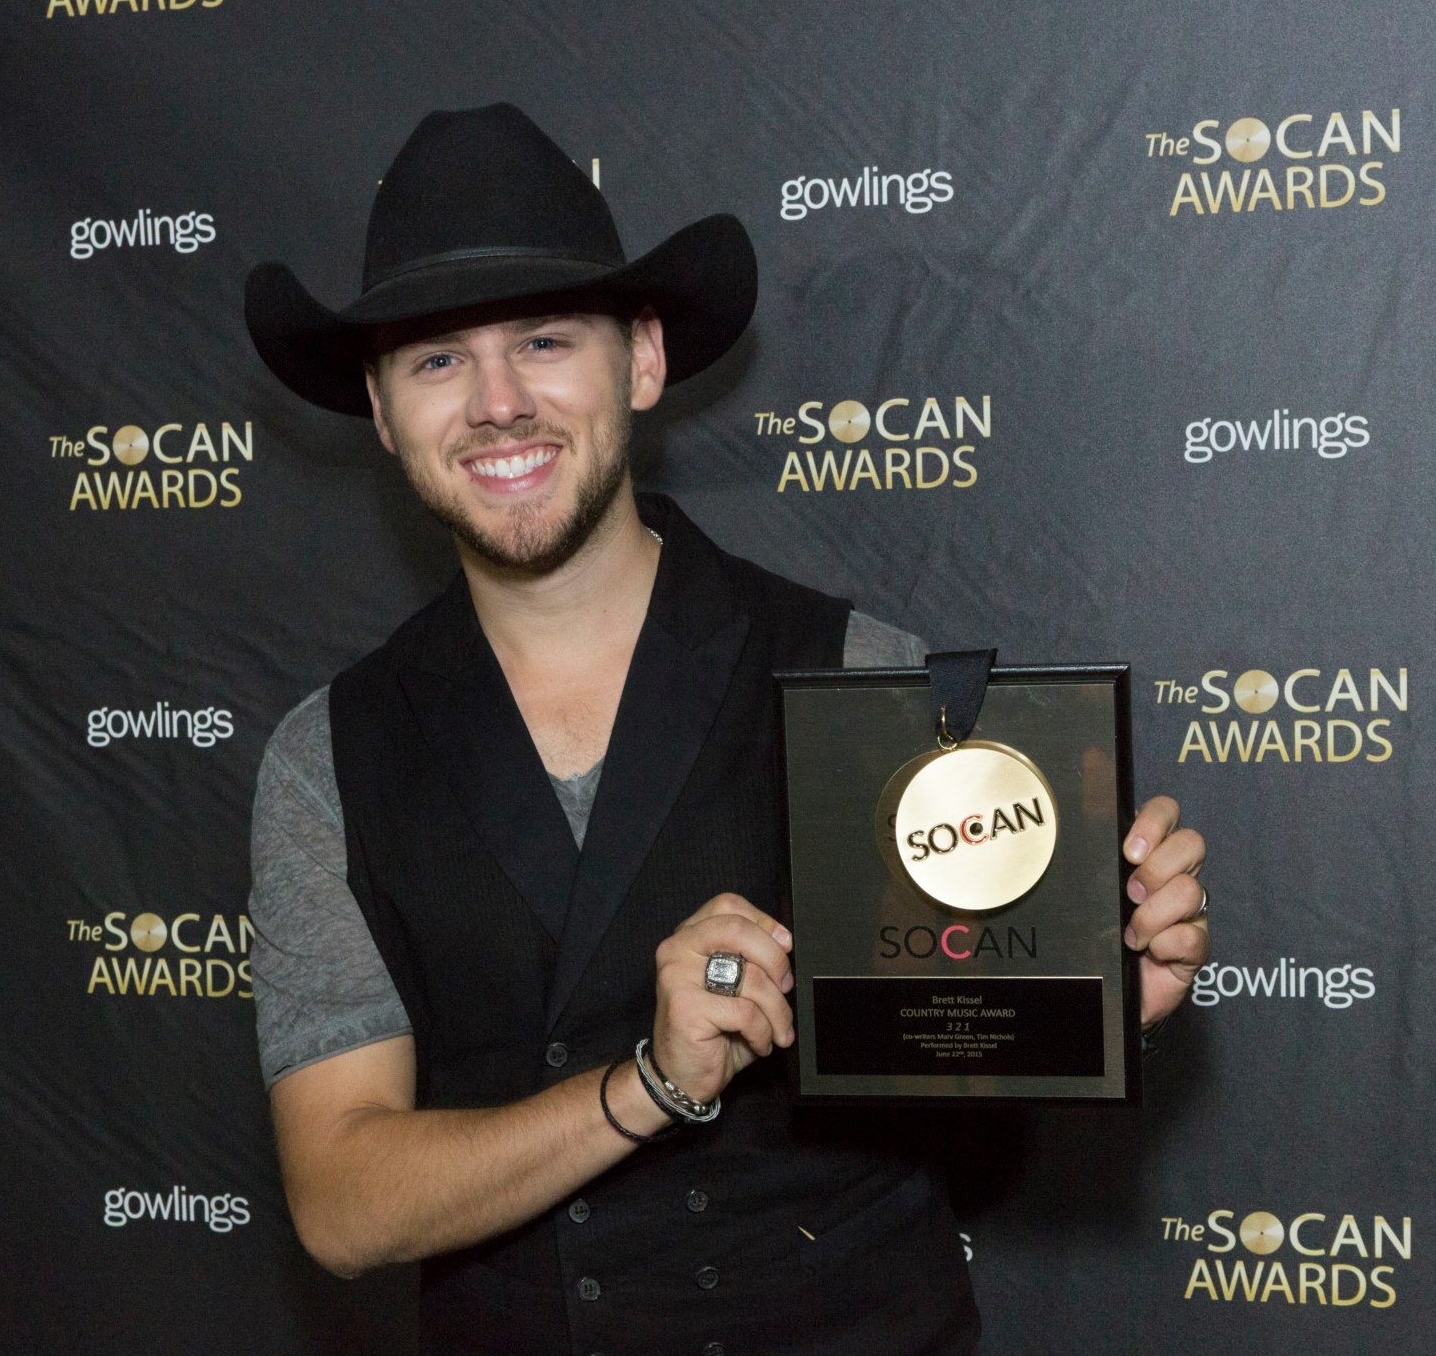 Country music artist Brett Kissel at the 2015 SOCAN Awards, holding the SOCAN Awards Plaque for Best Country Music Song